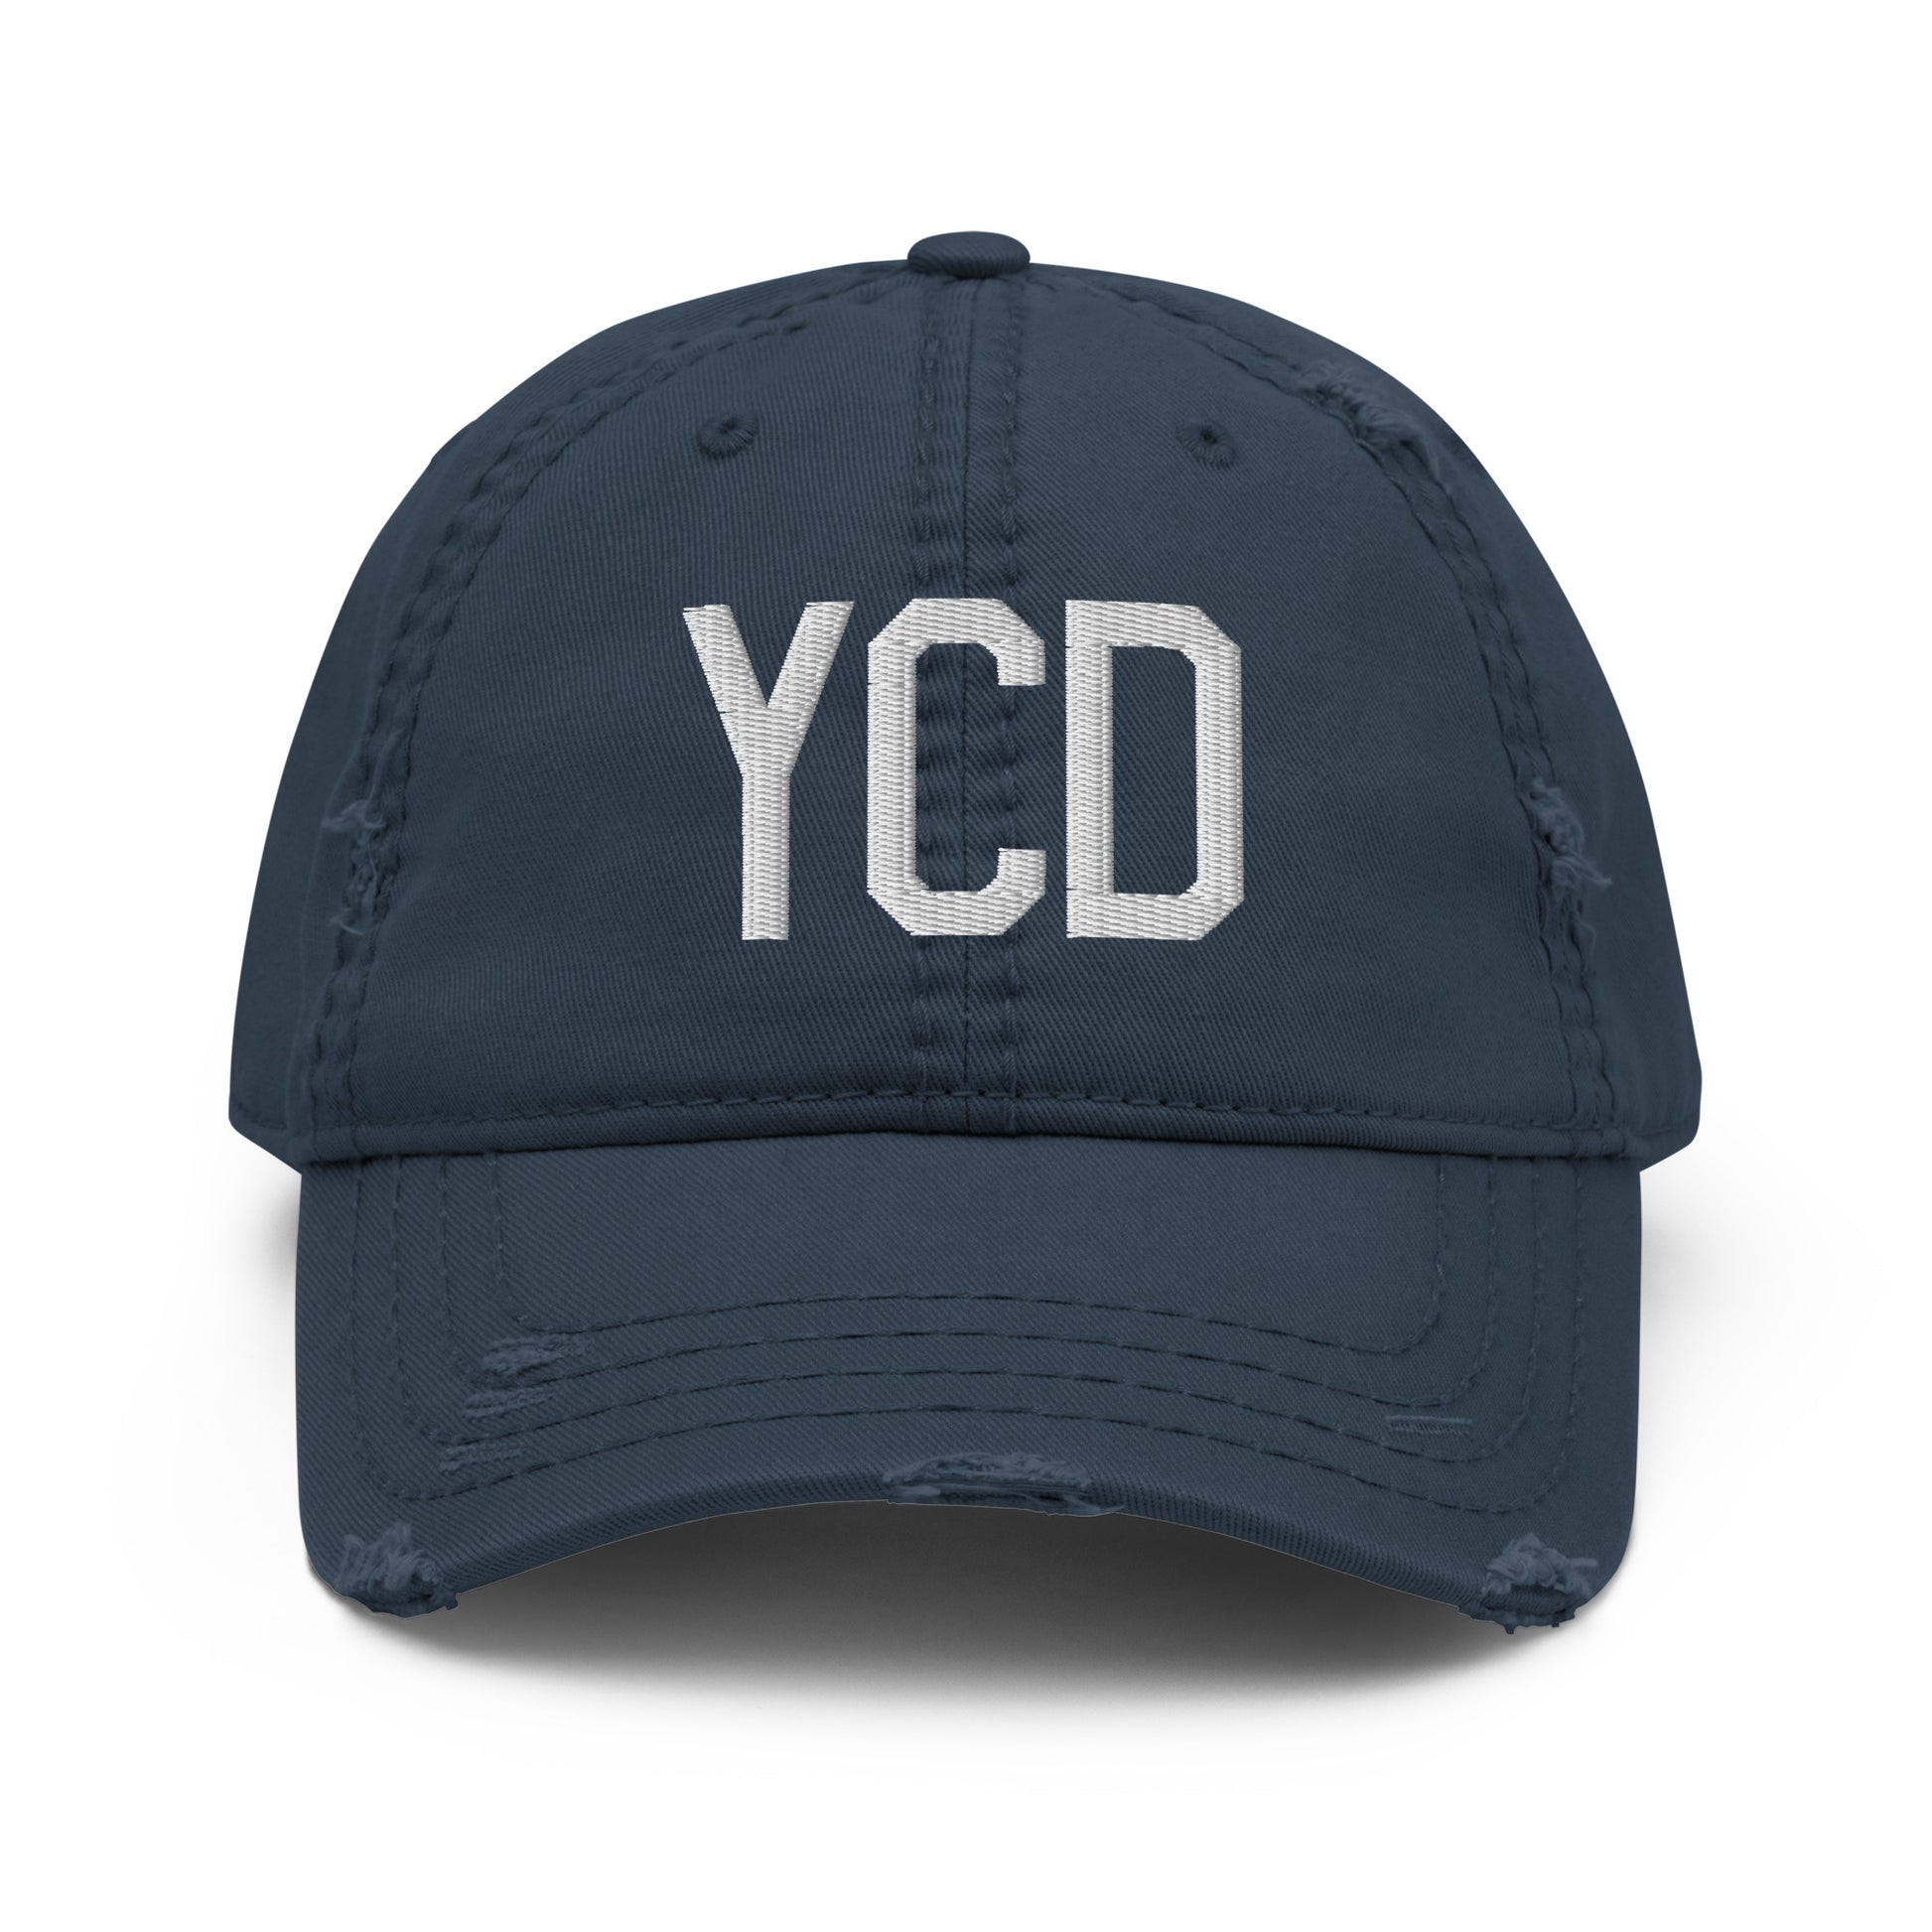 Airport Code Distressed Hat - White • YCD Nanaimo • YHM Designs - Image 13